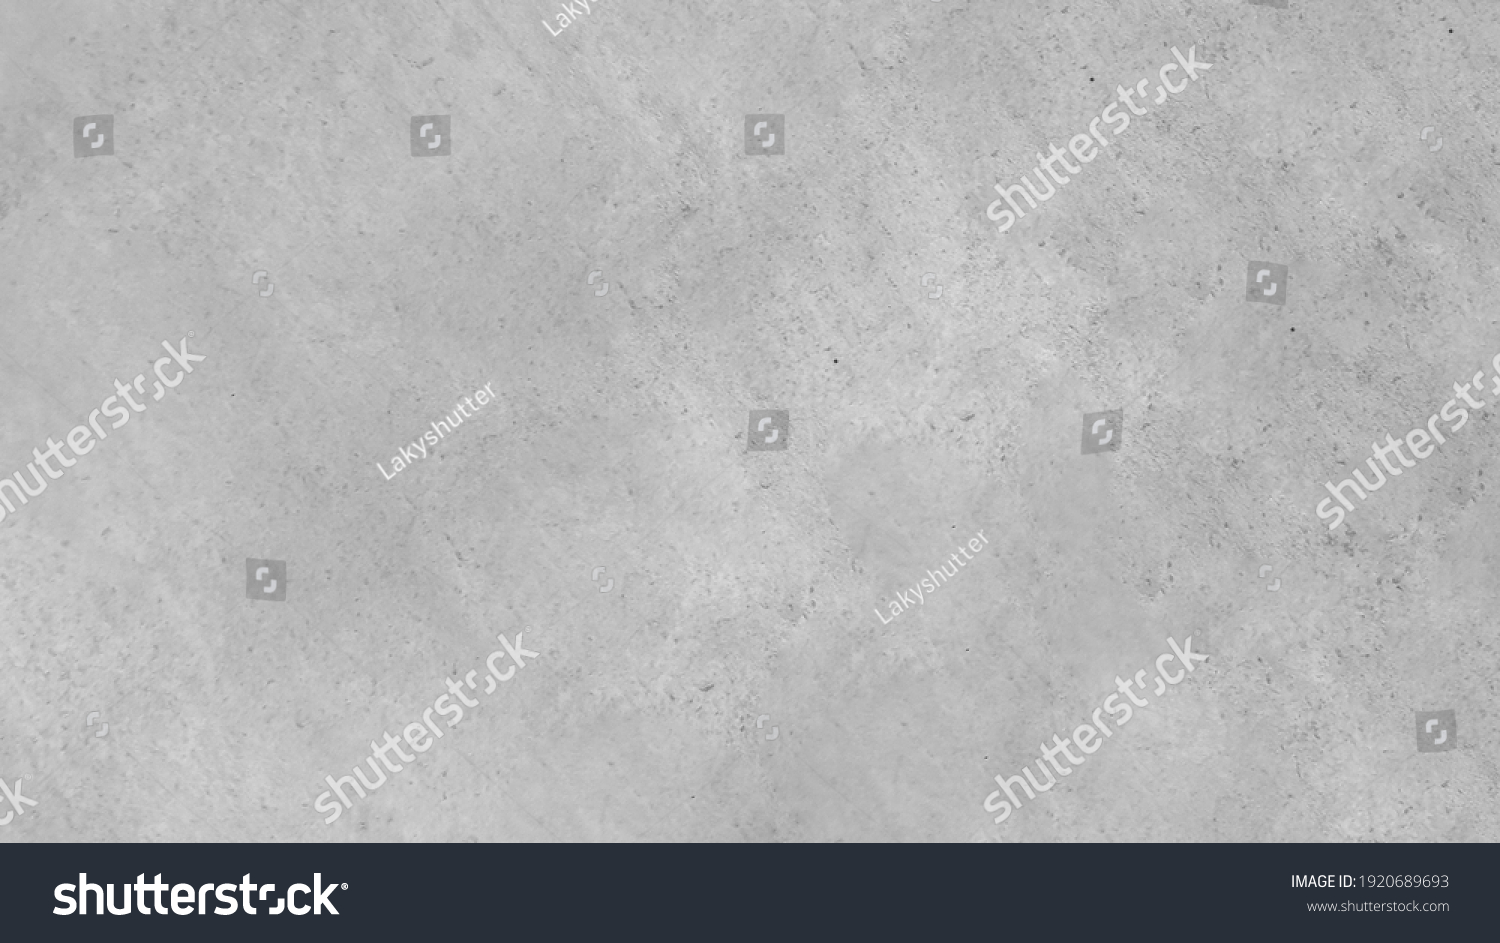 Concrete Textured Background Included Free Copy Space For Product Or Advertise Wording Design #1920689693